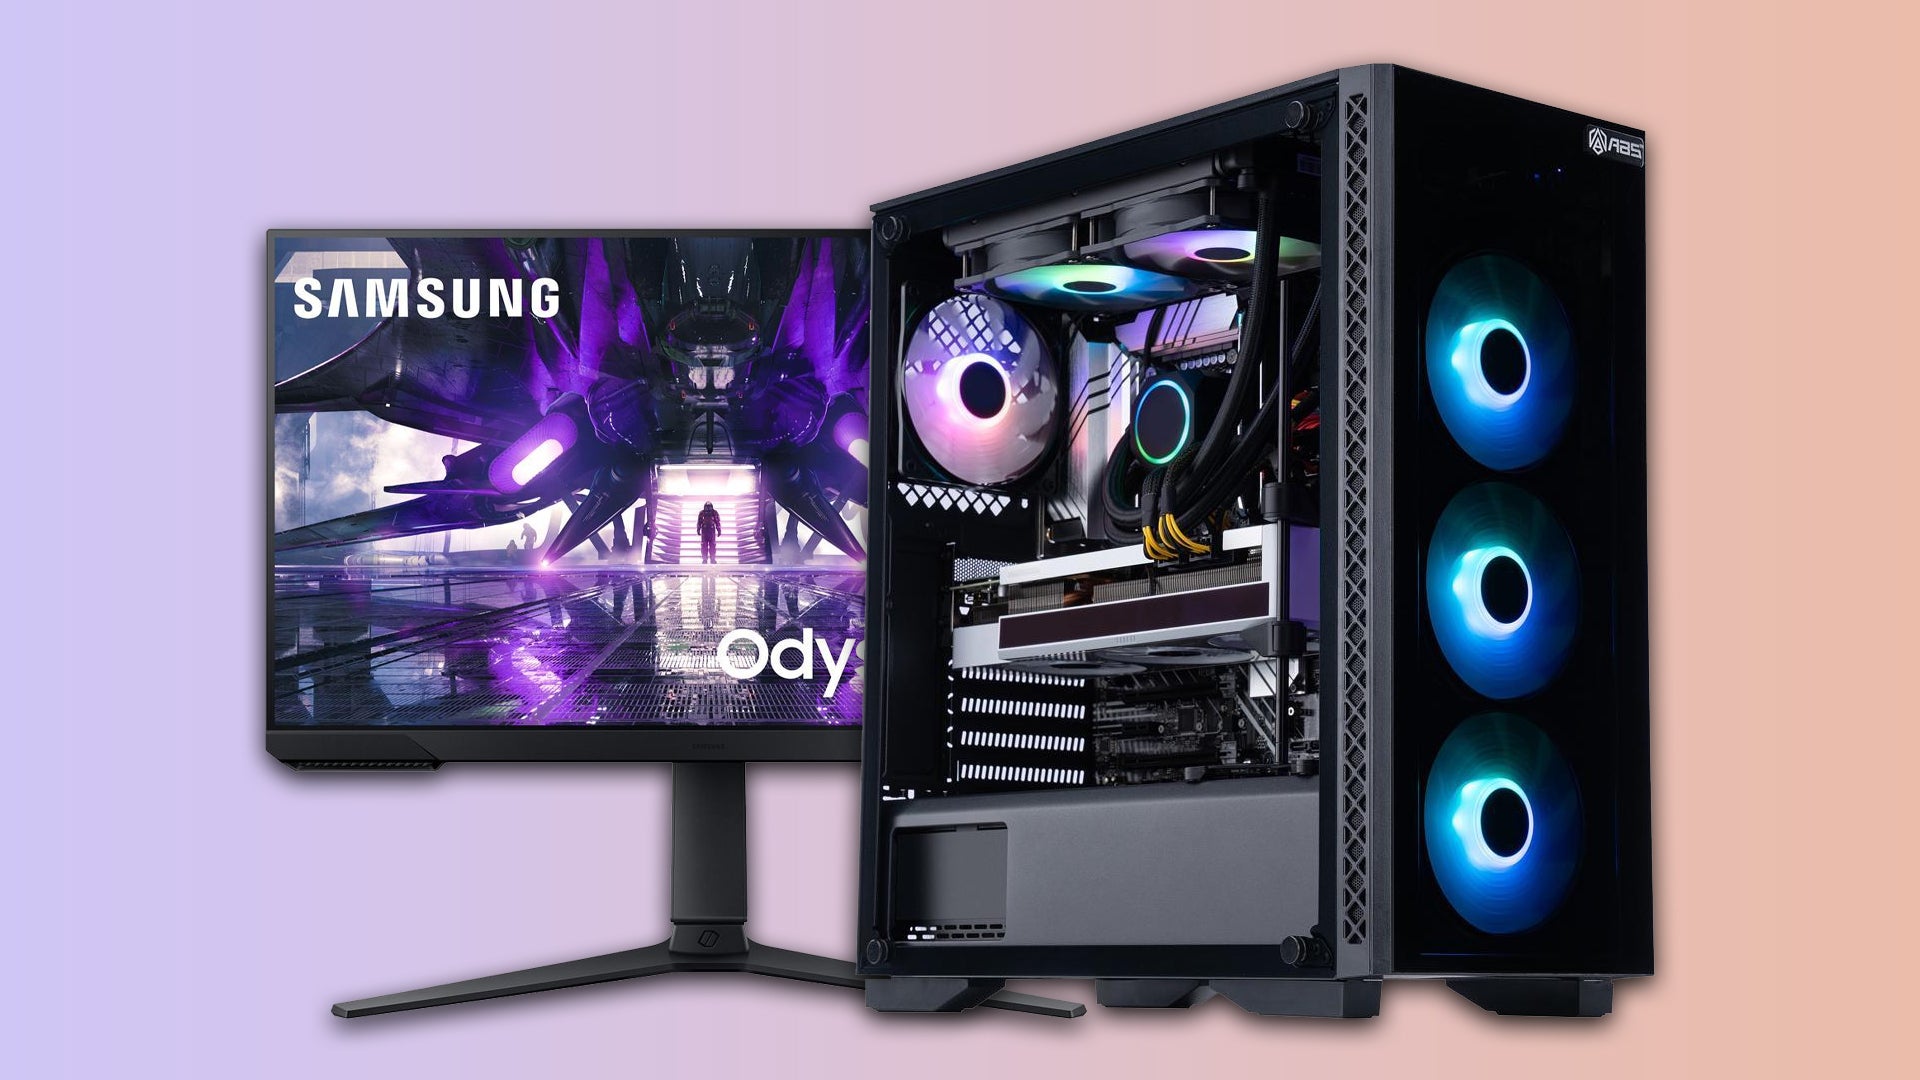 Image for Save $600 dollars on a prebuilt PC from Newegg with a 3070 Ti, 12th gen i7 and free Samsung monitor